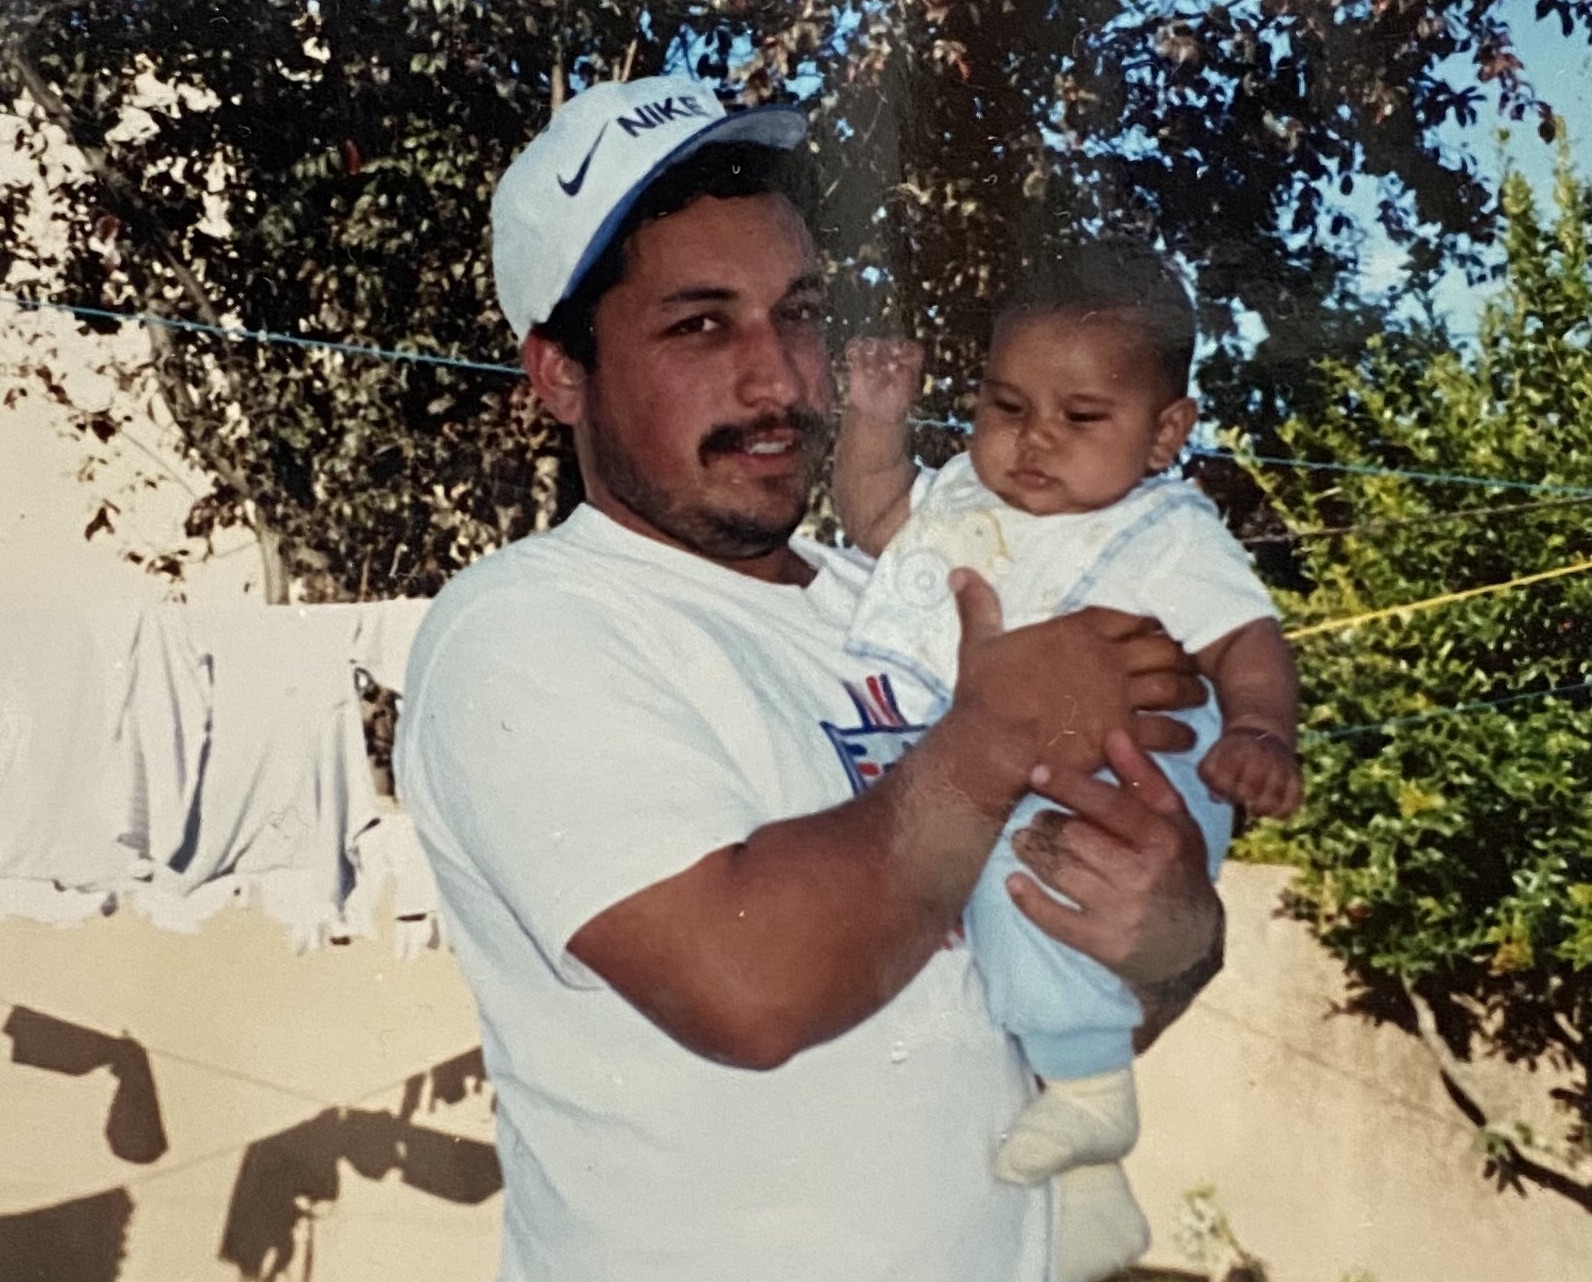 Jose Ayala as a baby in his dad's arms